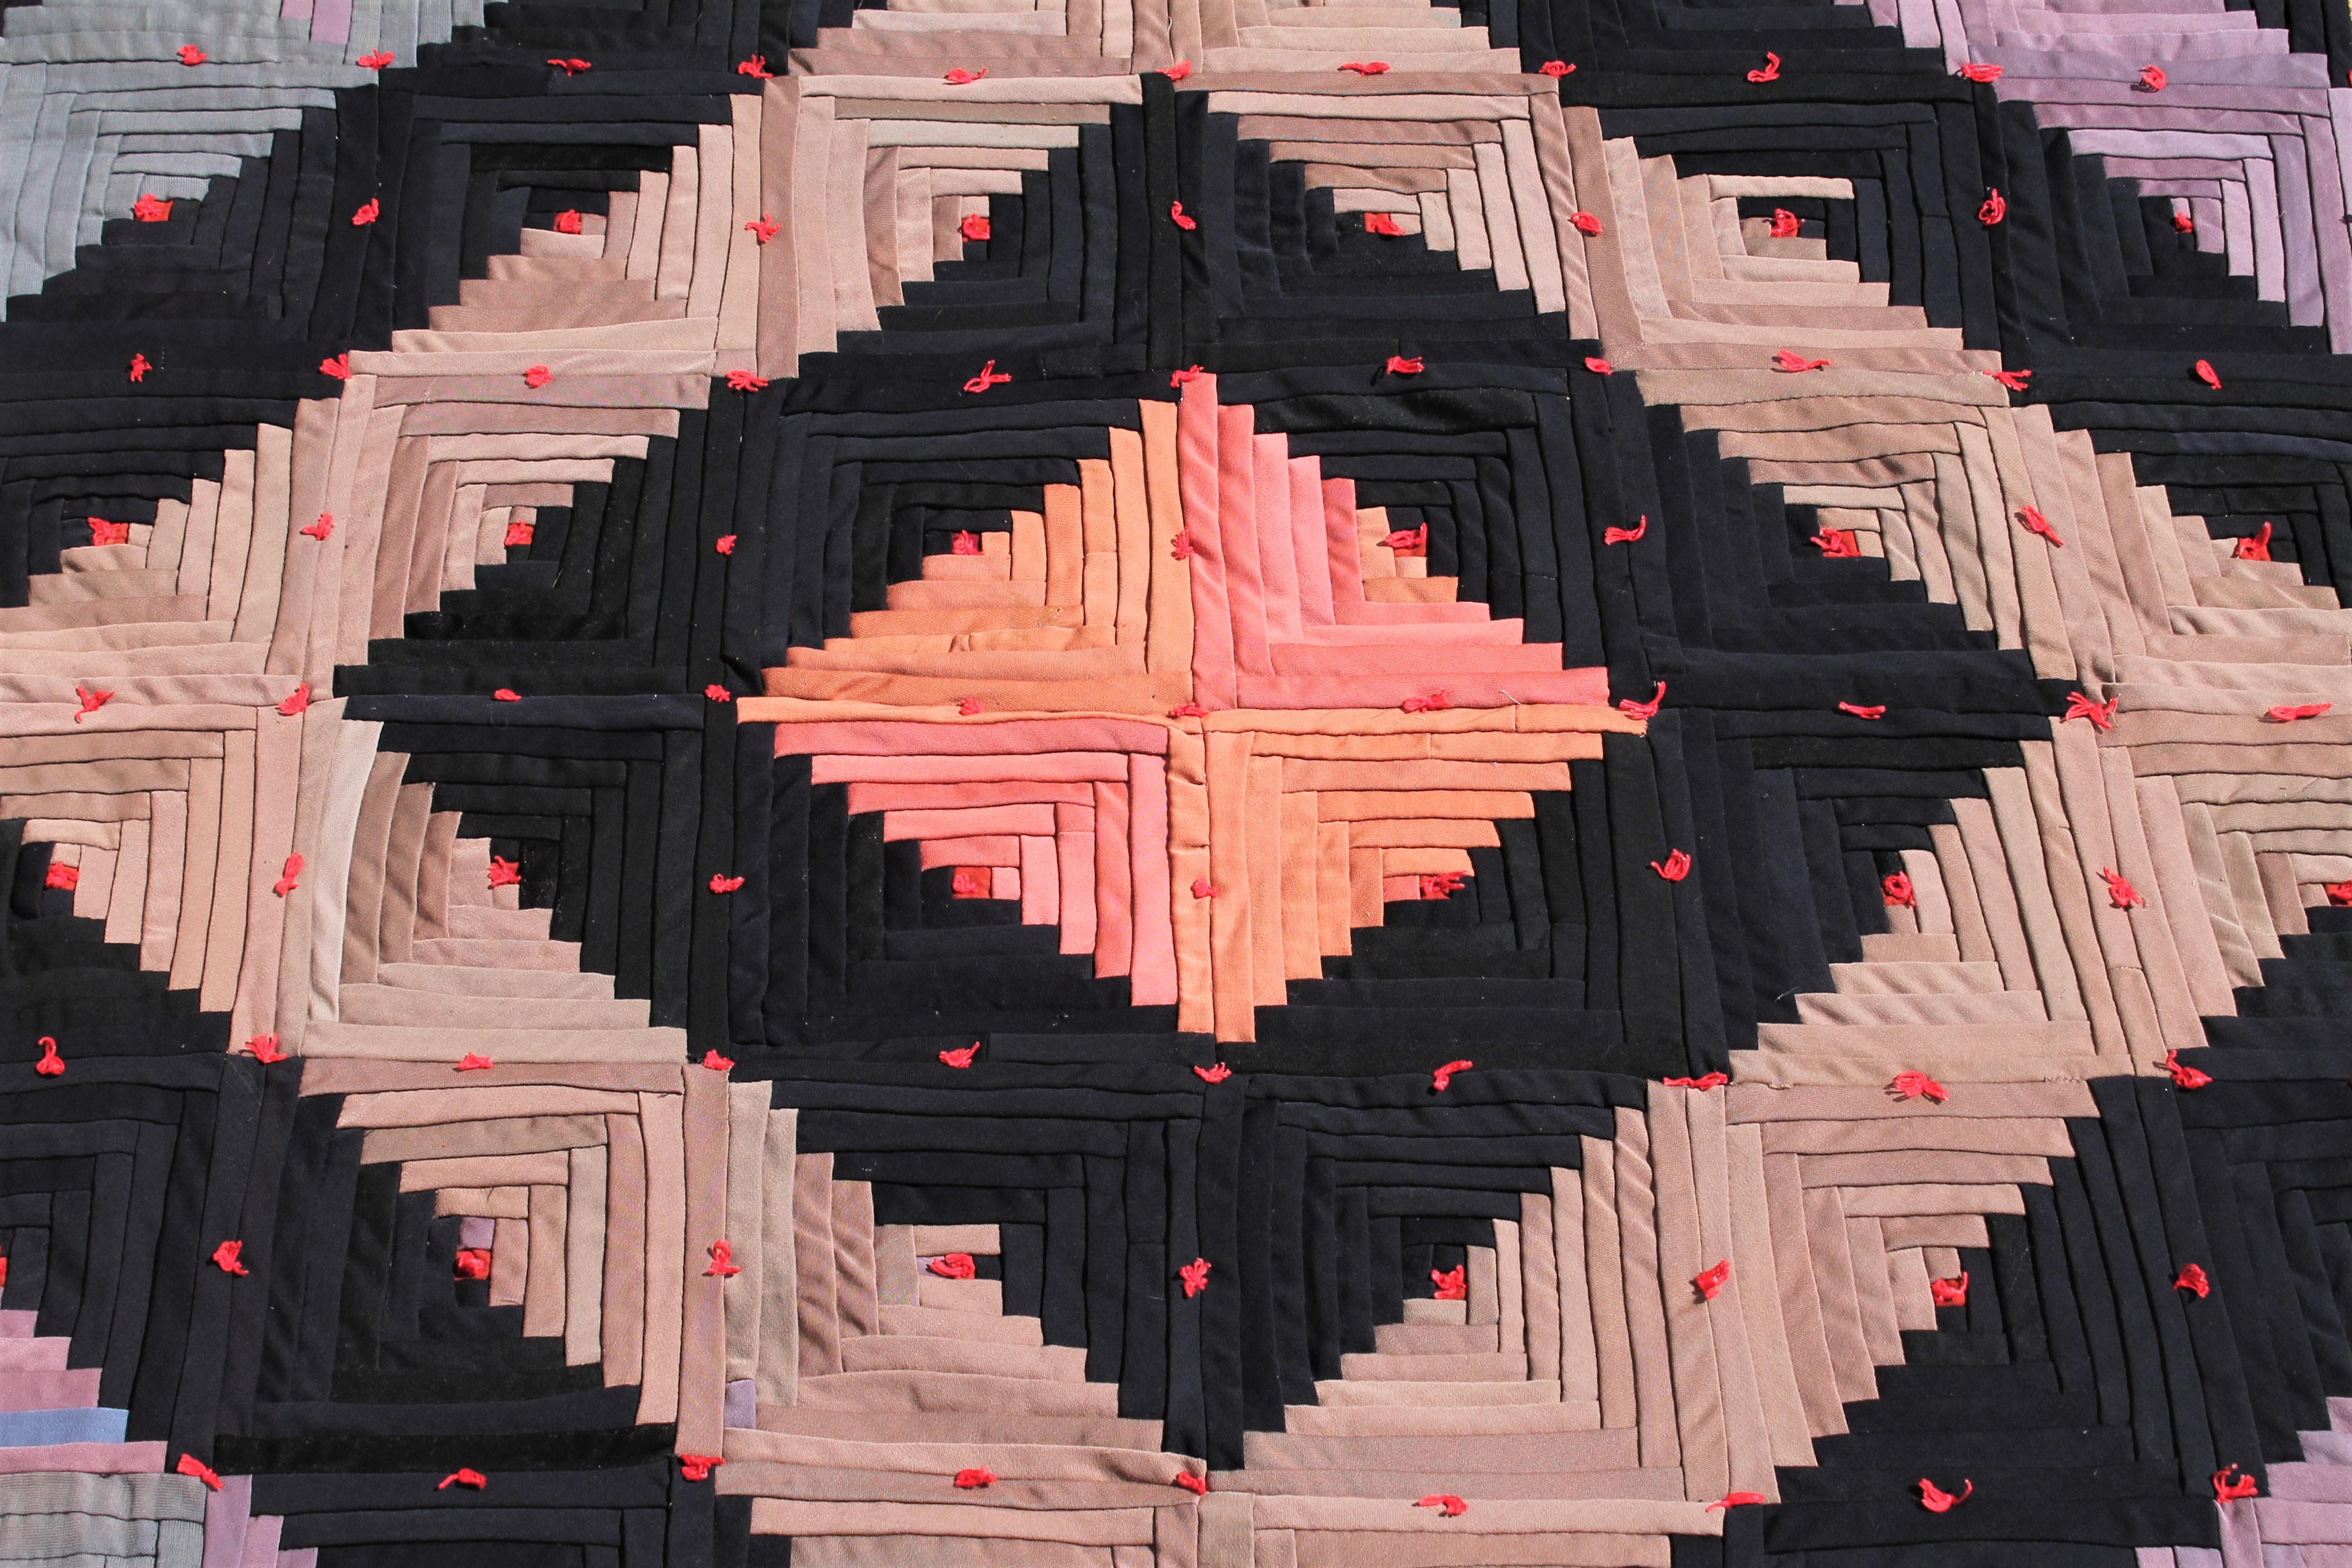 Pennsylvania log cabin tied comforter quilt in wool. This quilt is in fantastic condition.